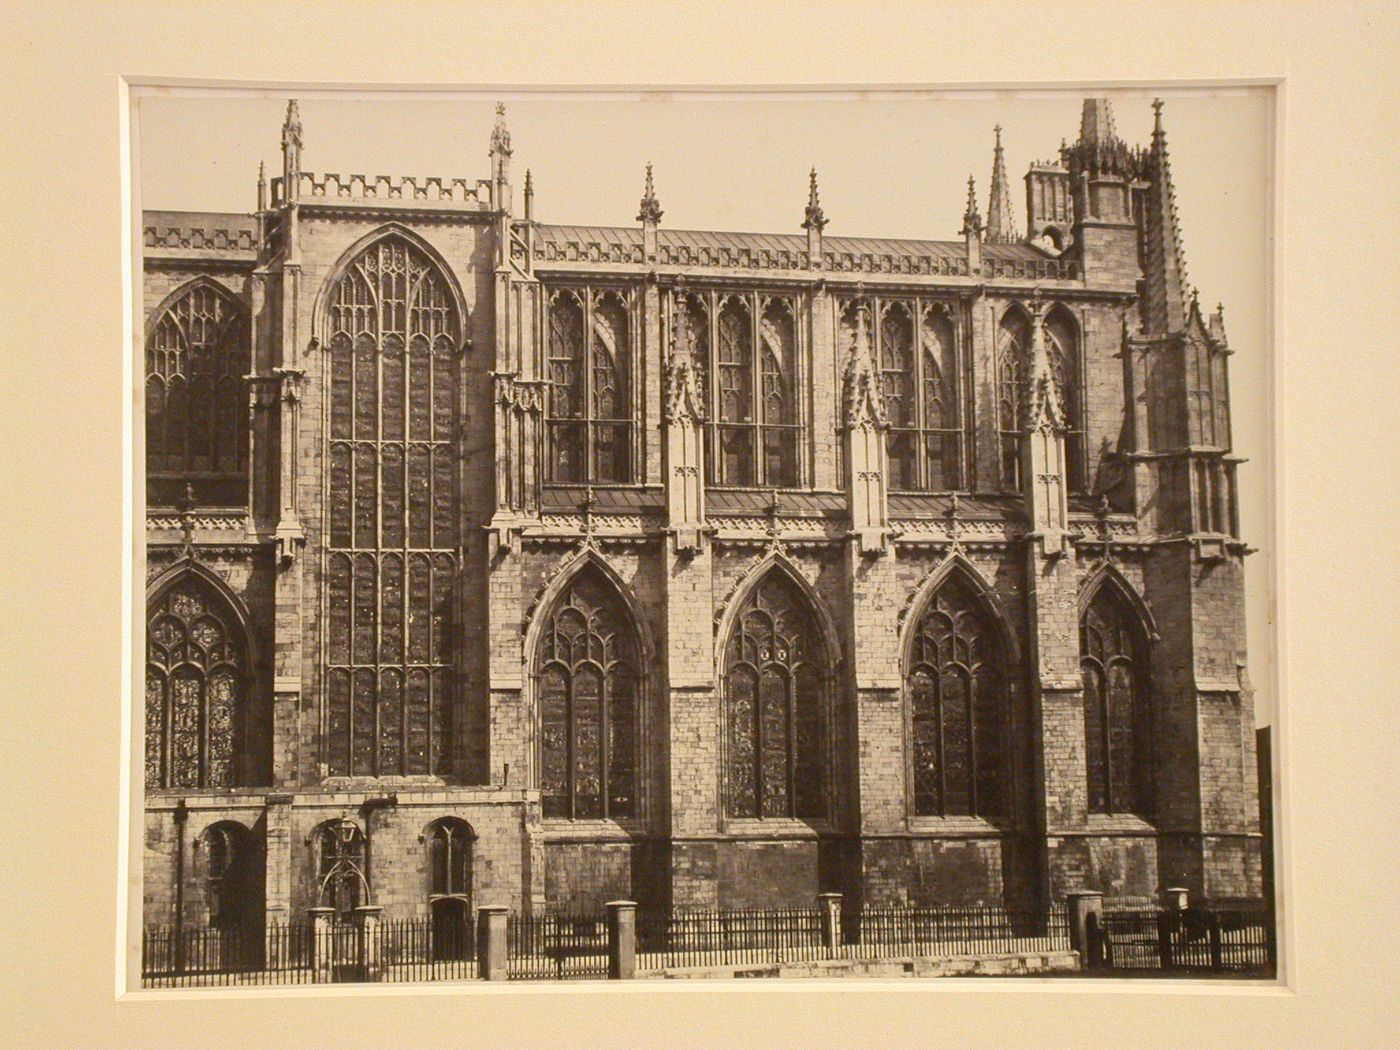 View of exterior of nave of York Minster, York, England